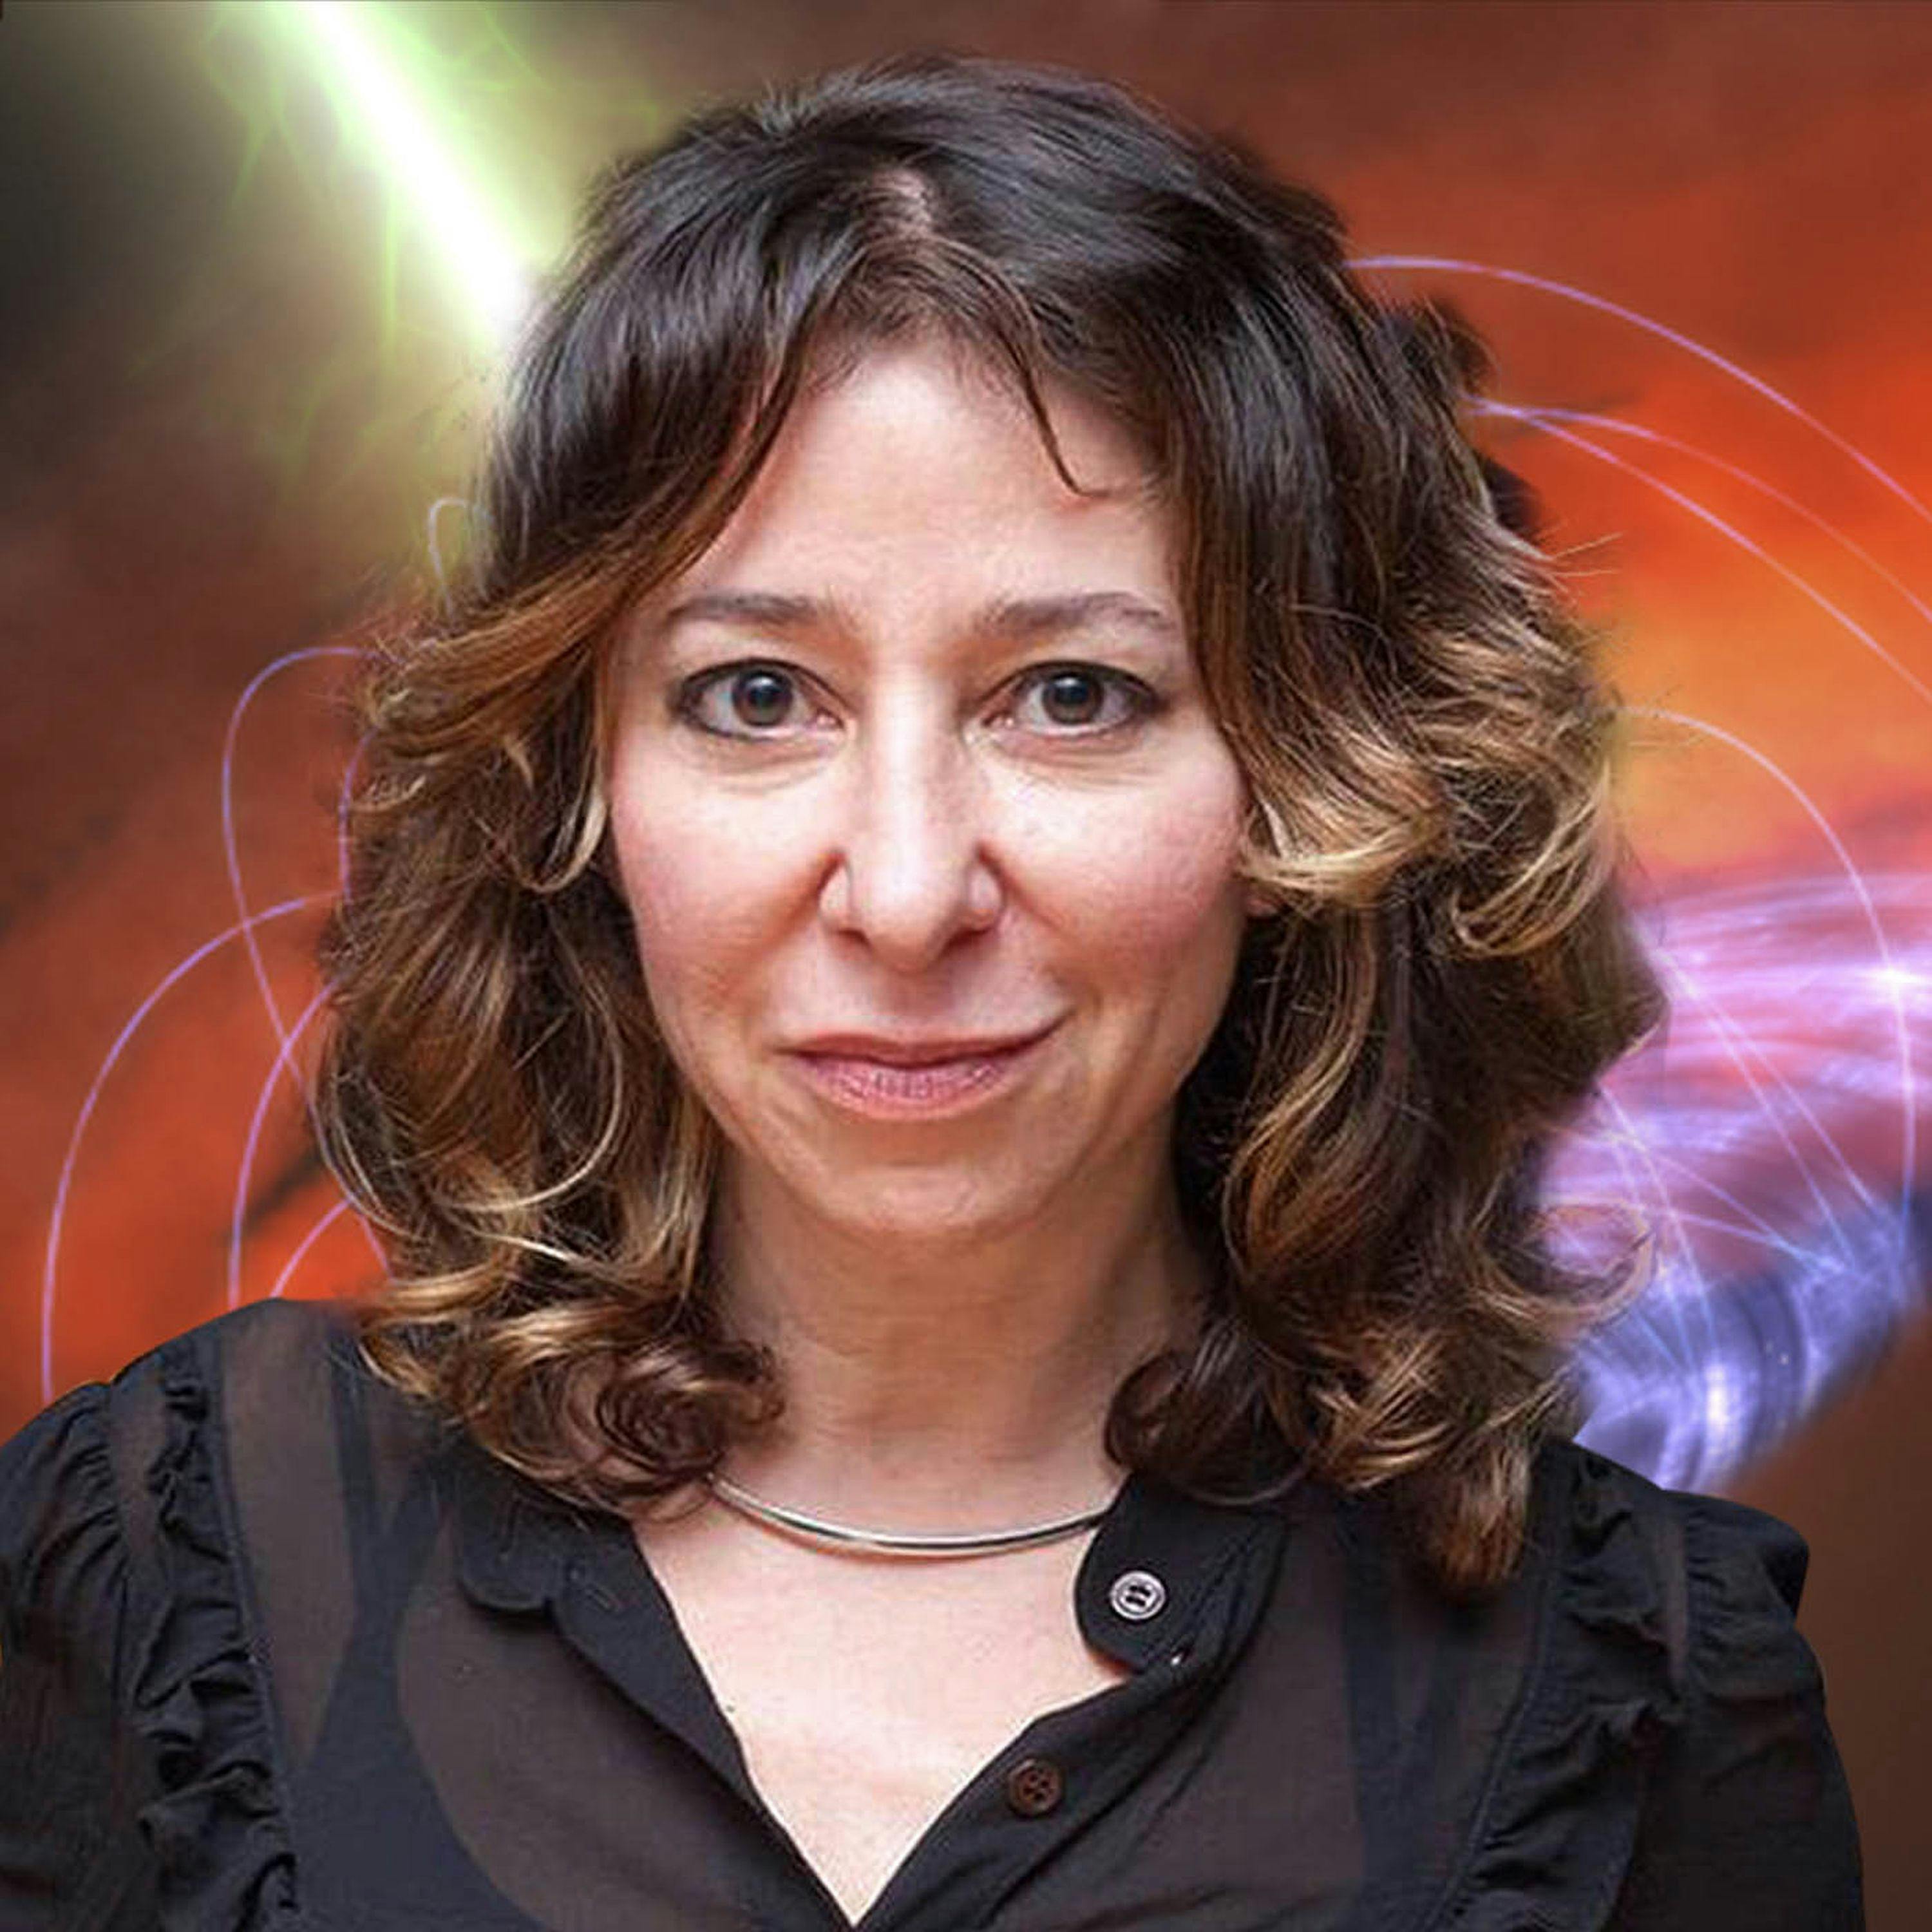 What's a black hole? Interview with astrophysicist Janna Levin